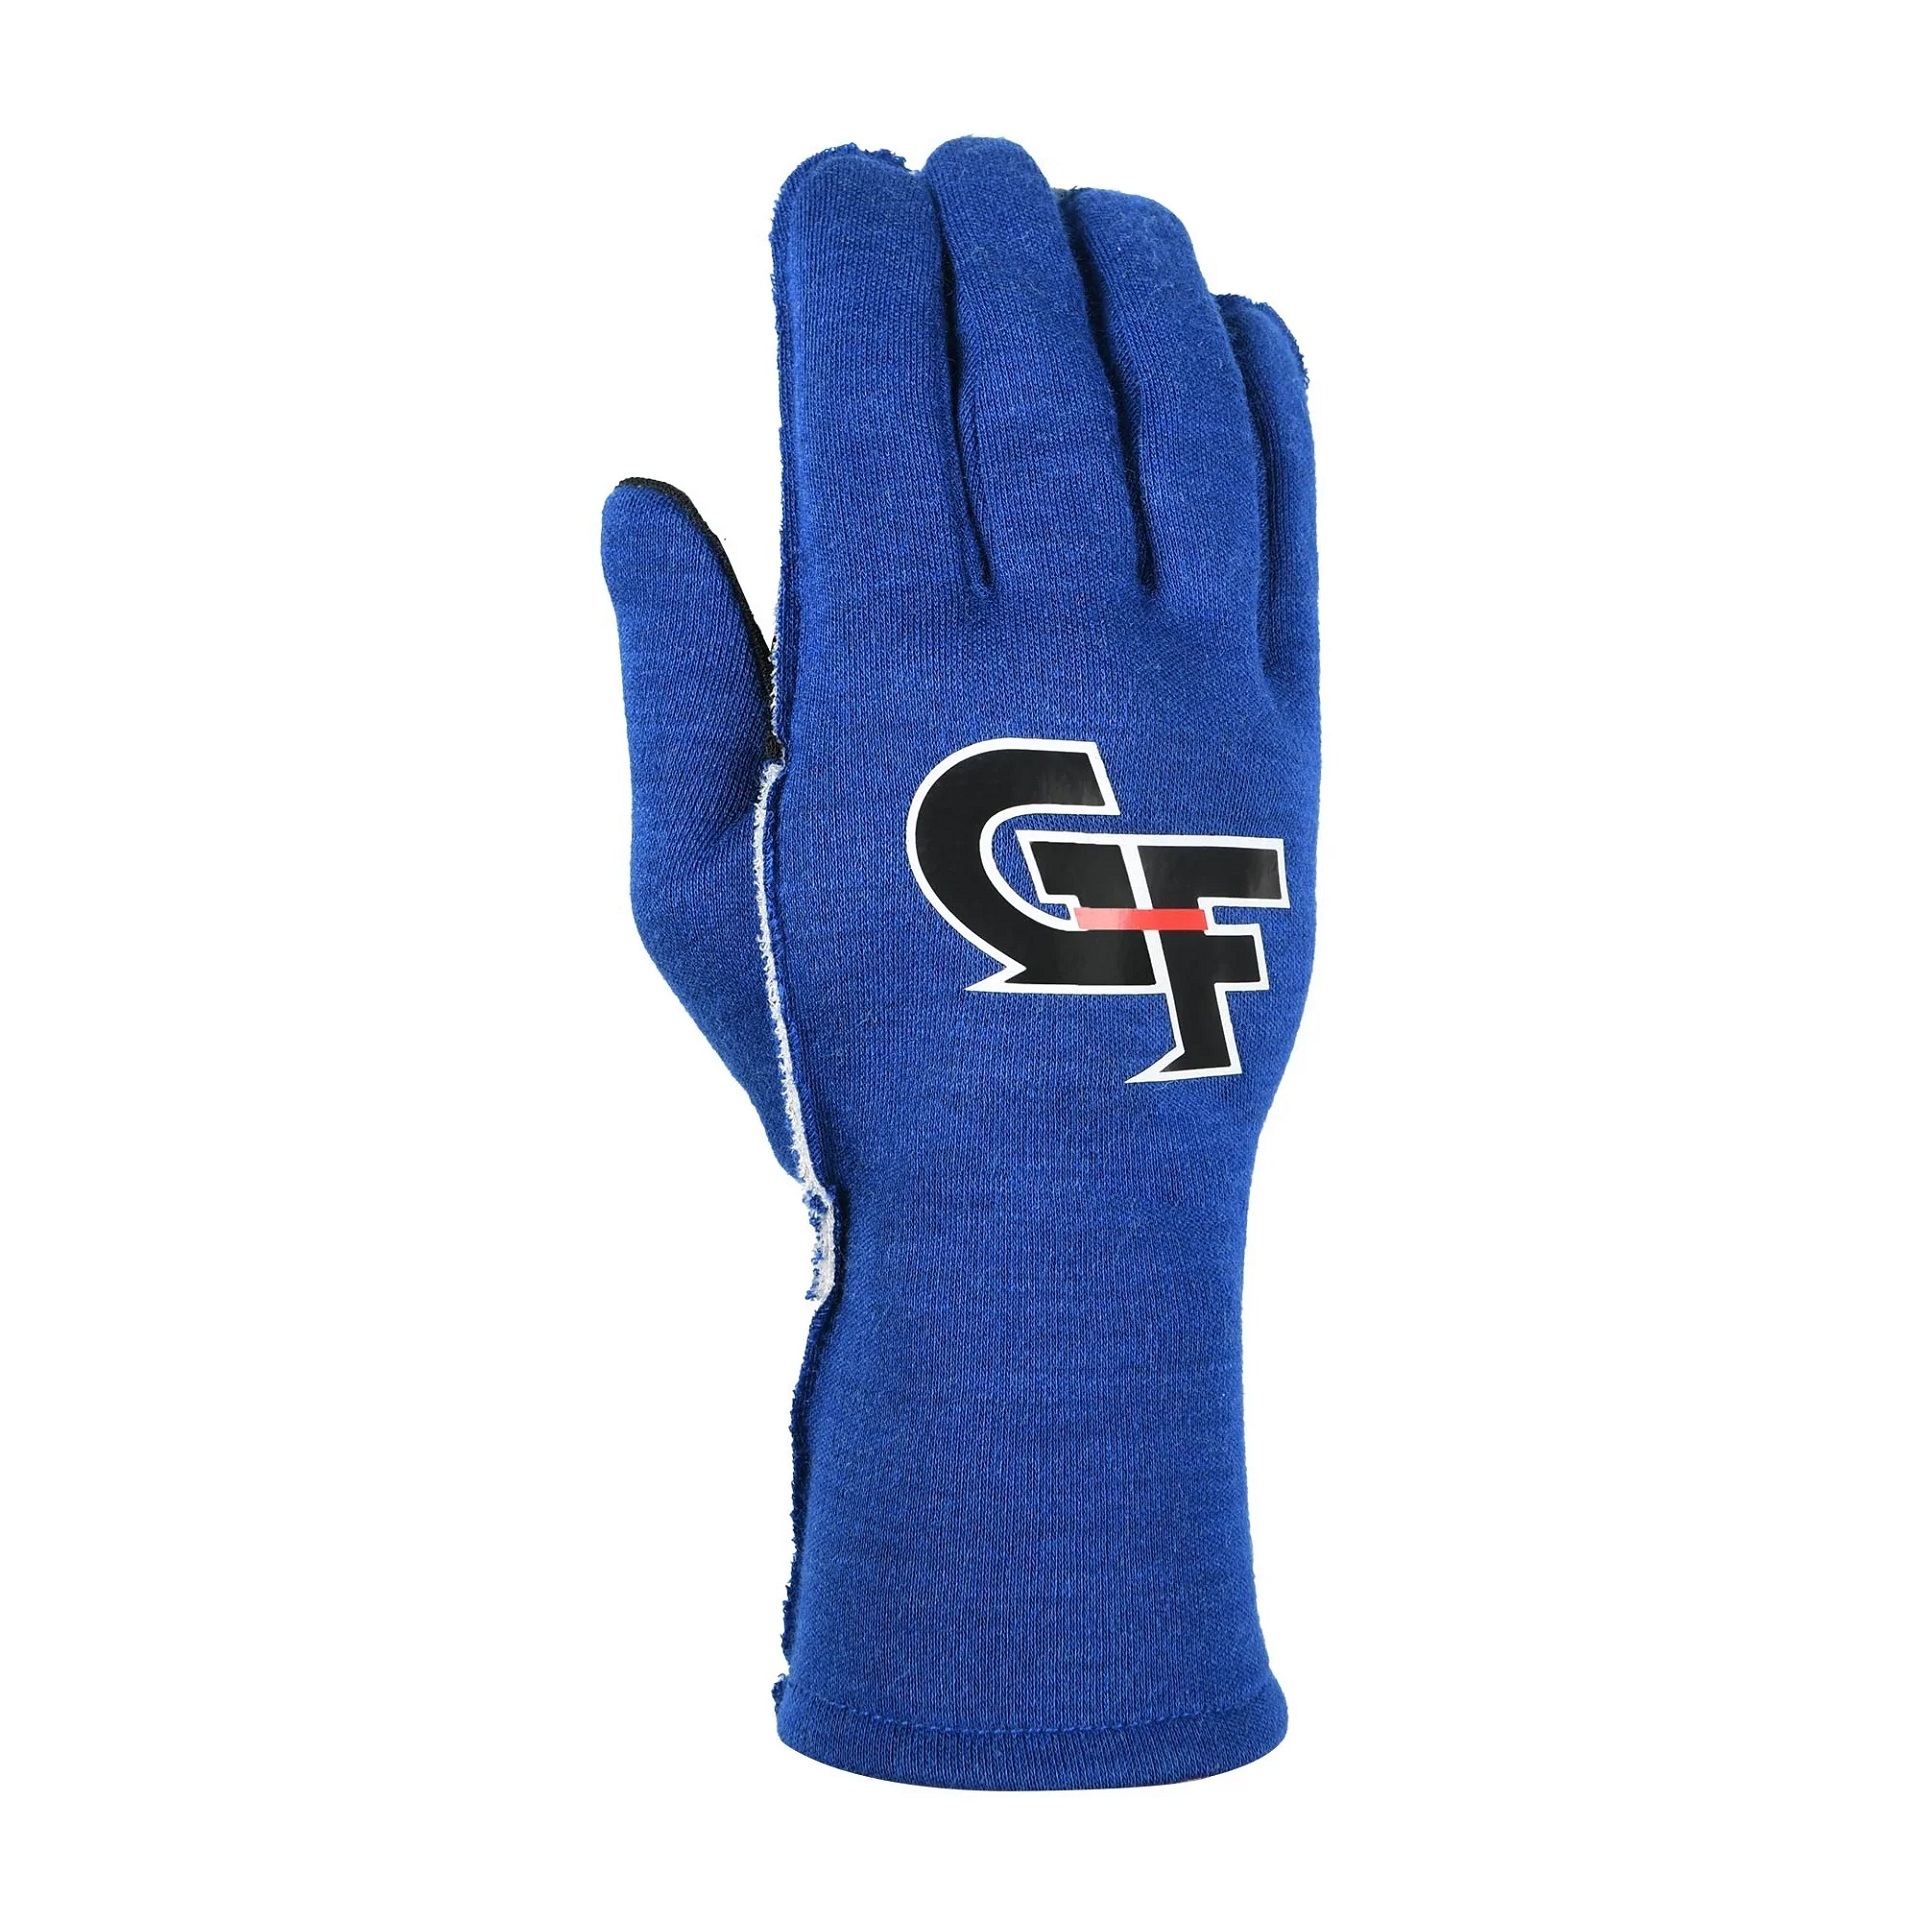 G-FORCE Gloves G-Limit X-Small Blue